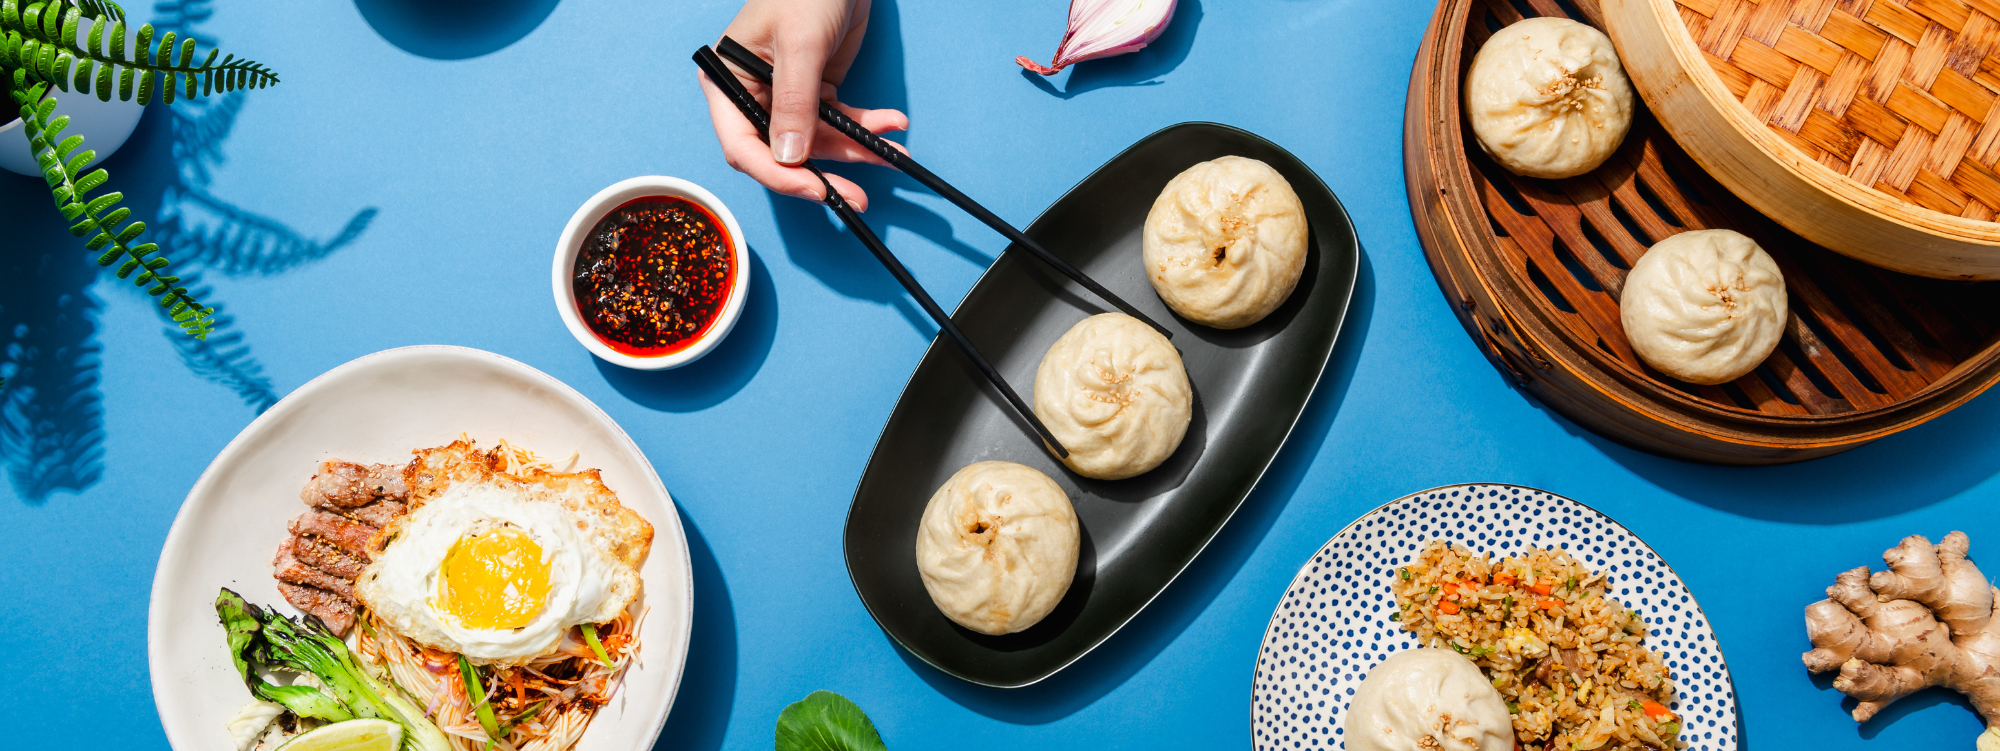 Bao Bao Buns with chili oil and bamboo steamer